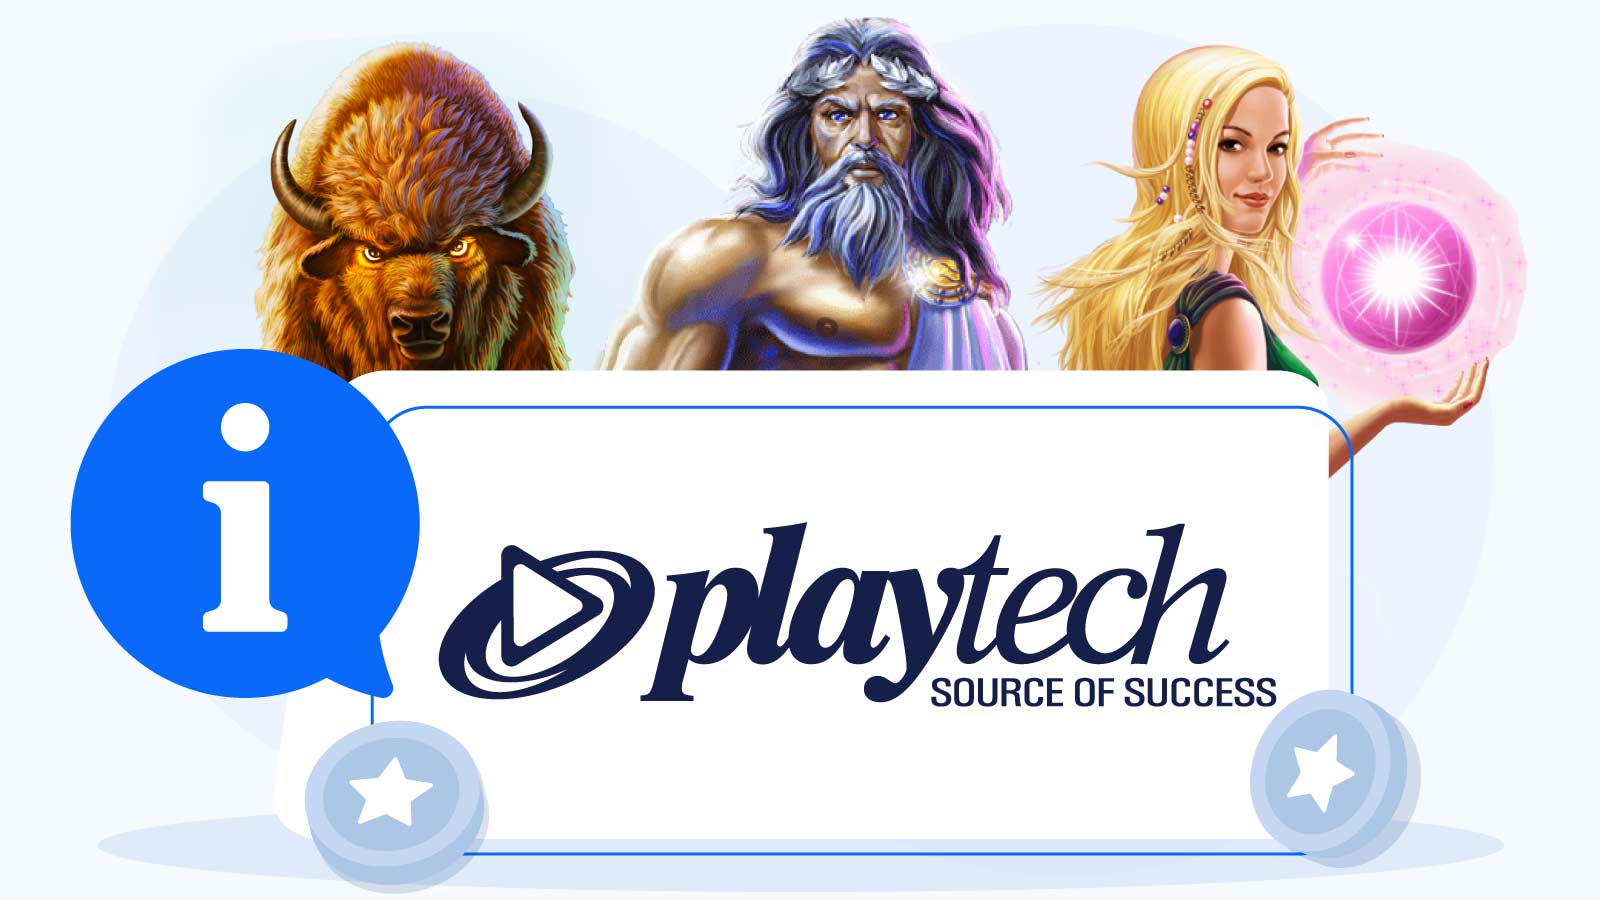 Short Overview of the Playtech Software Company